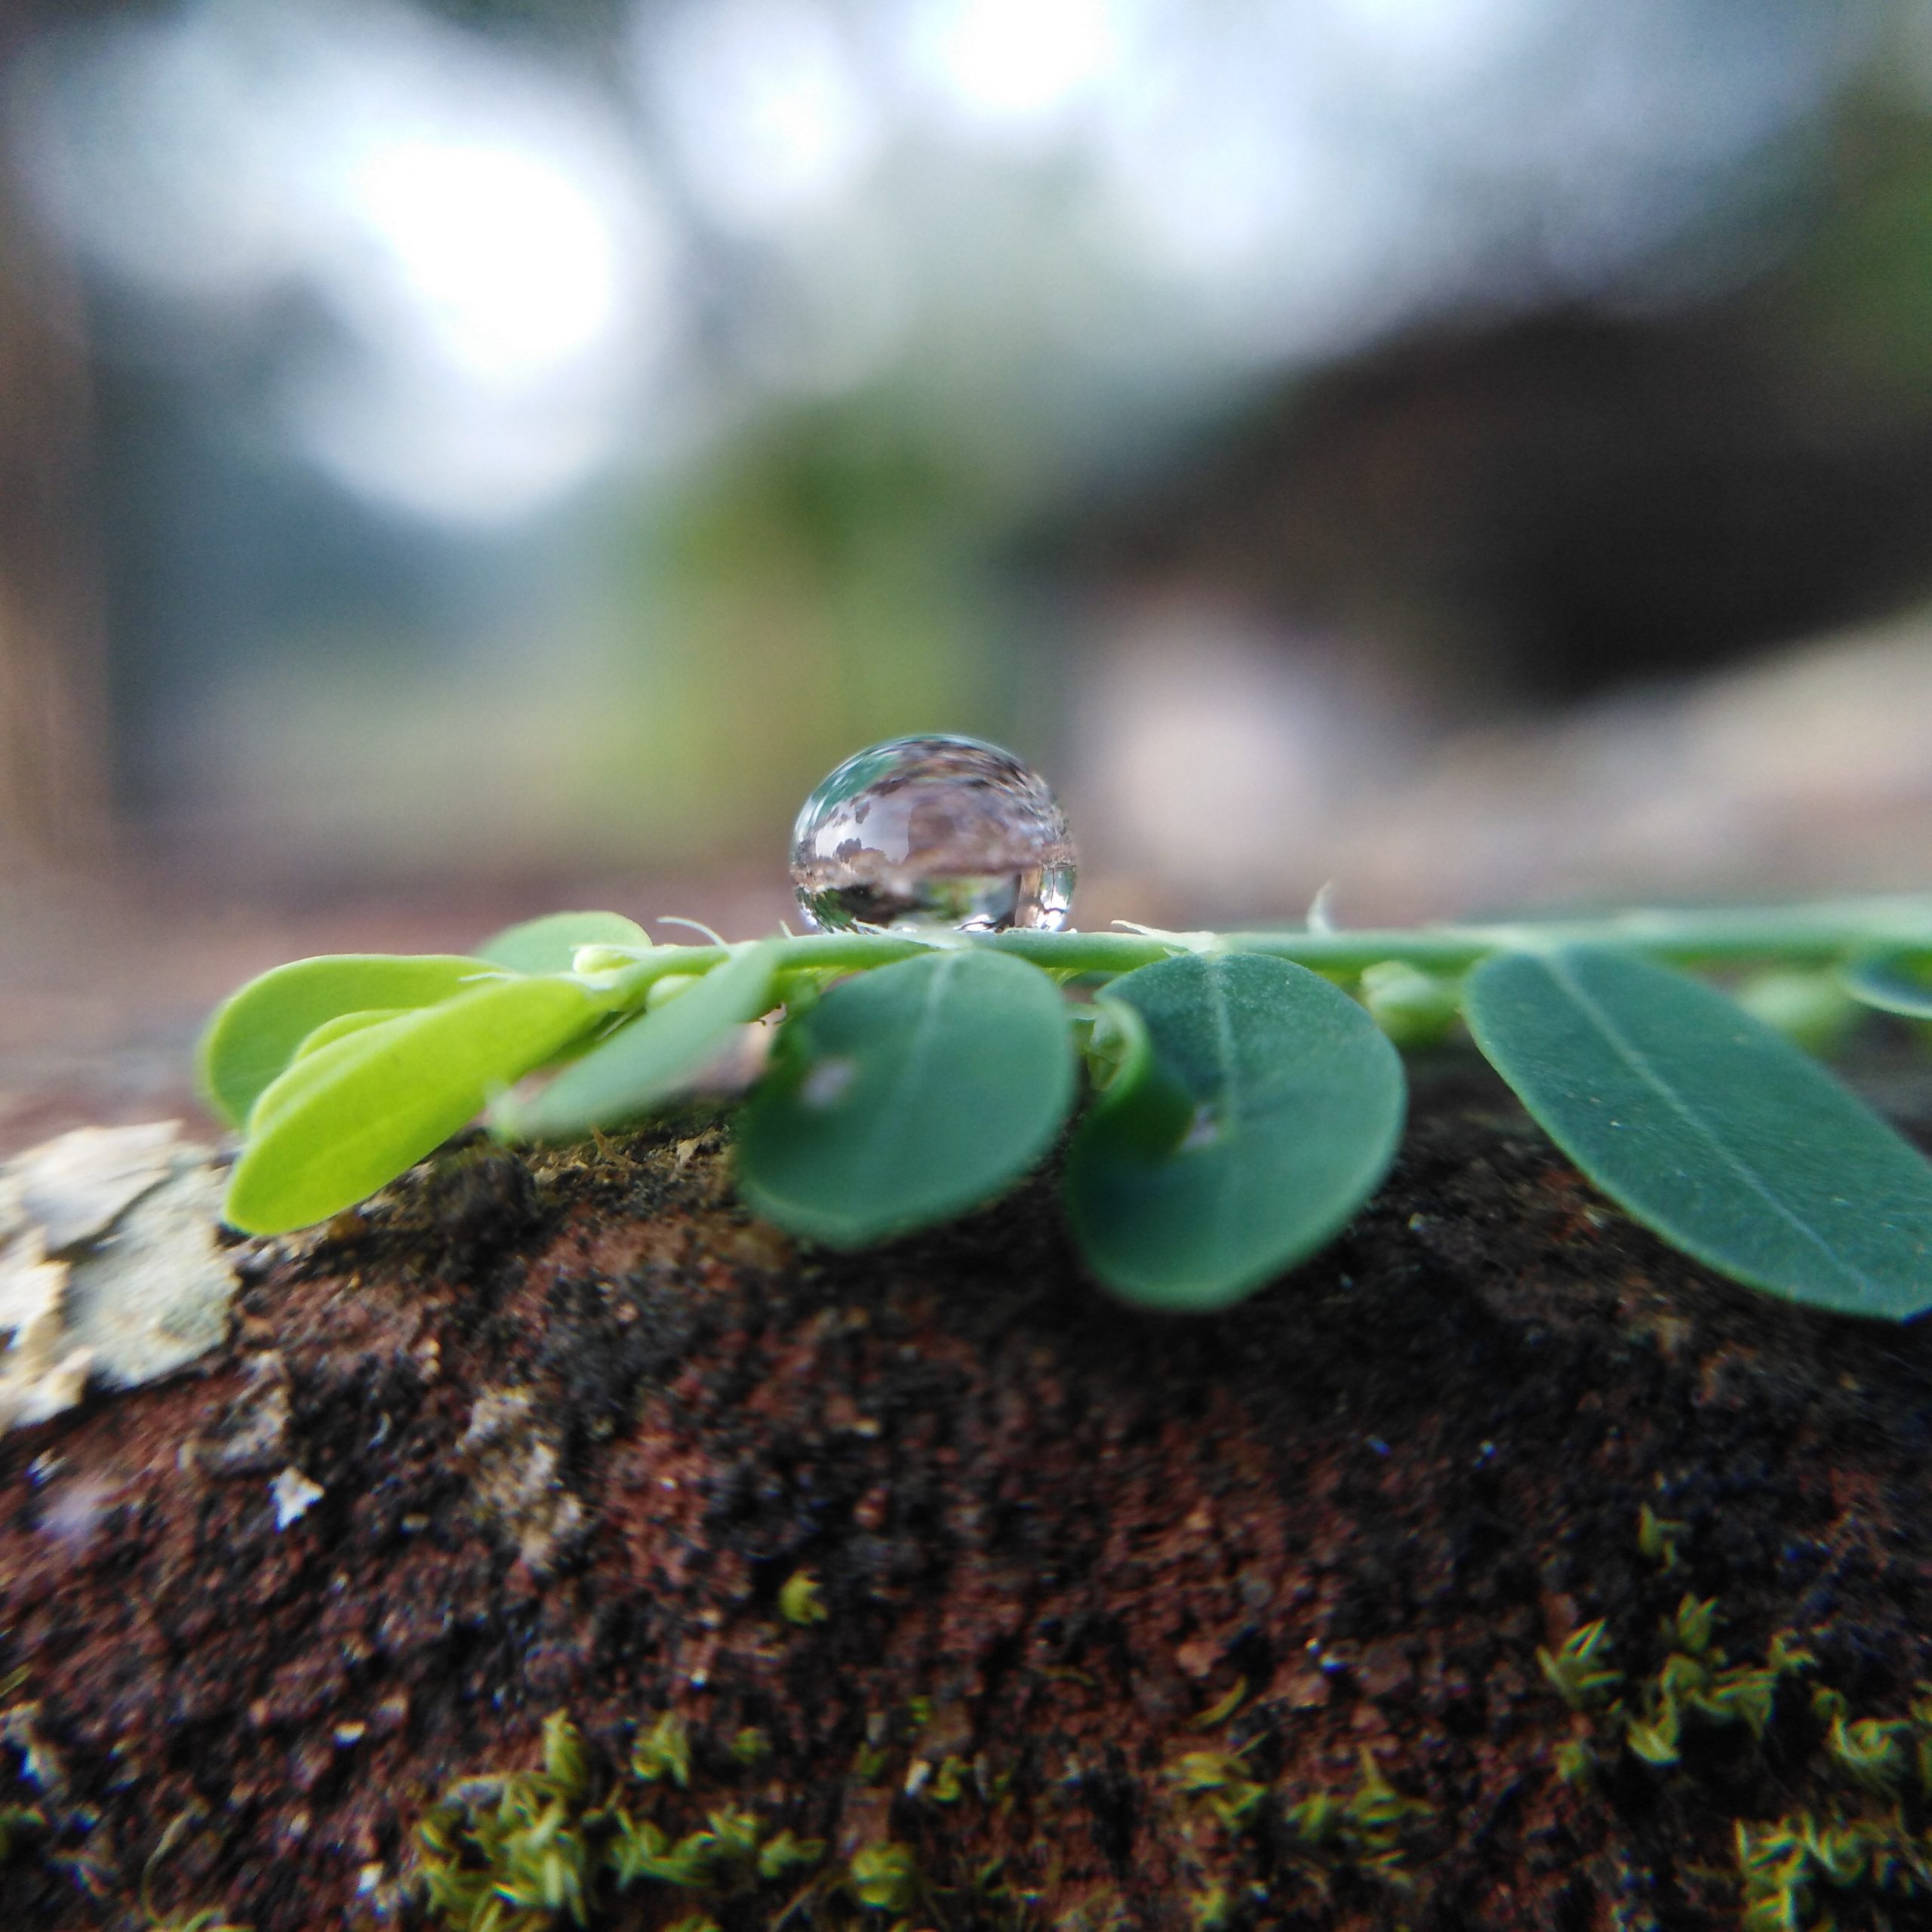 A water drop on a branch